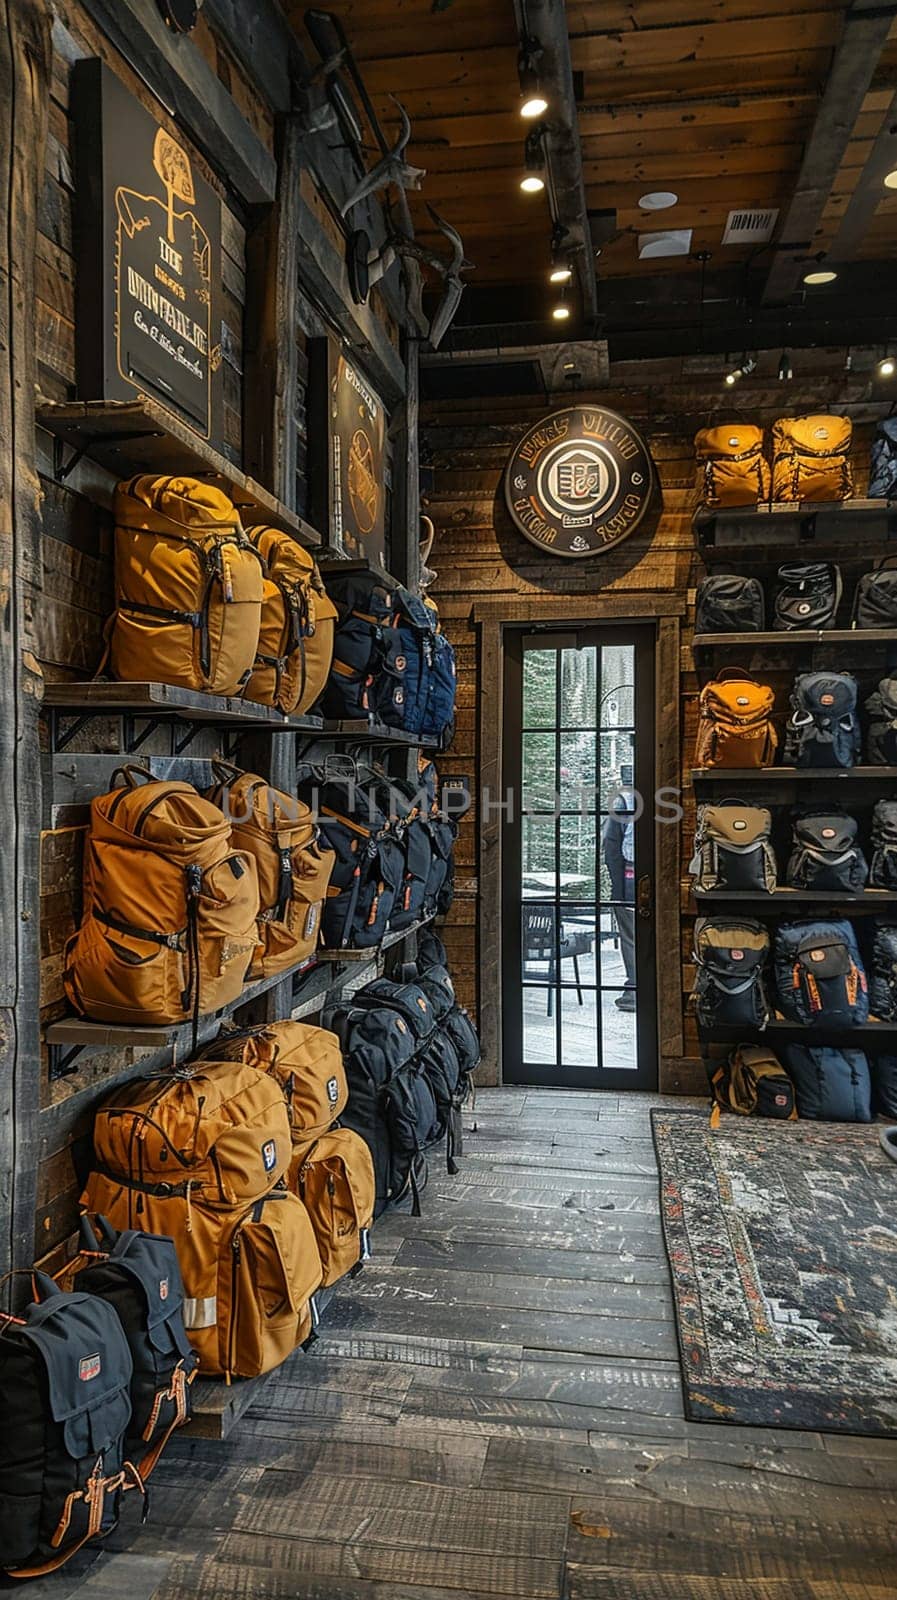 Outdoor Gear Store Equips Adventurous Spirits in Business of Exploration Retail by Benzoix